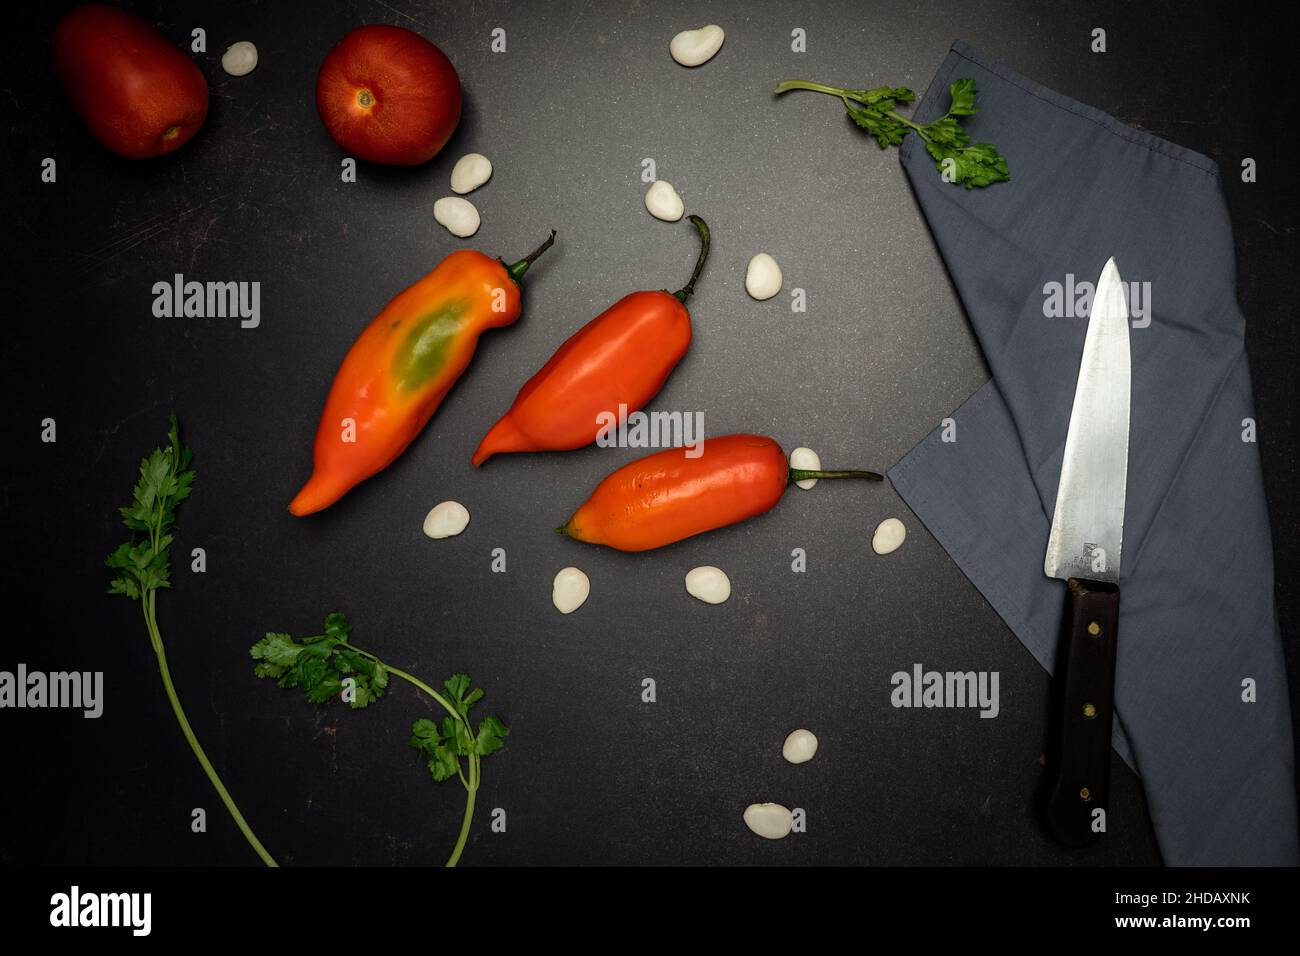 A top view of red chili peppers on a black messy kitchen table Stock Photo